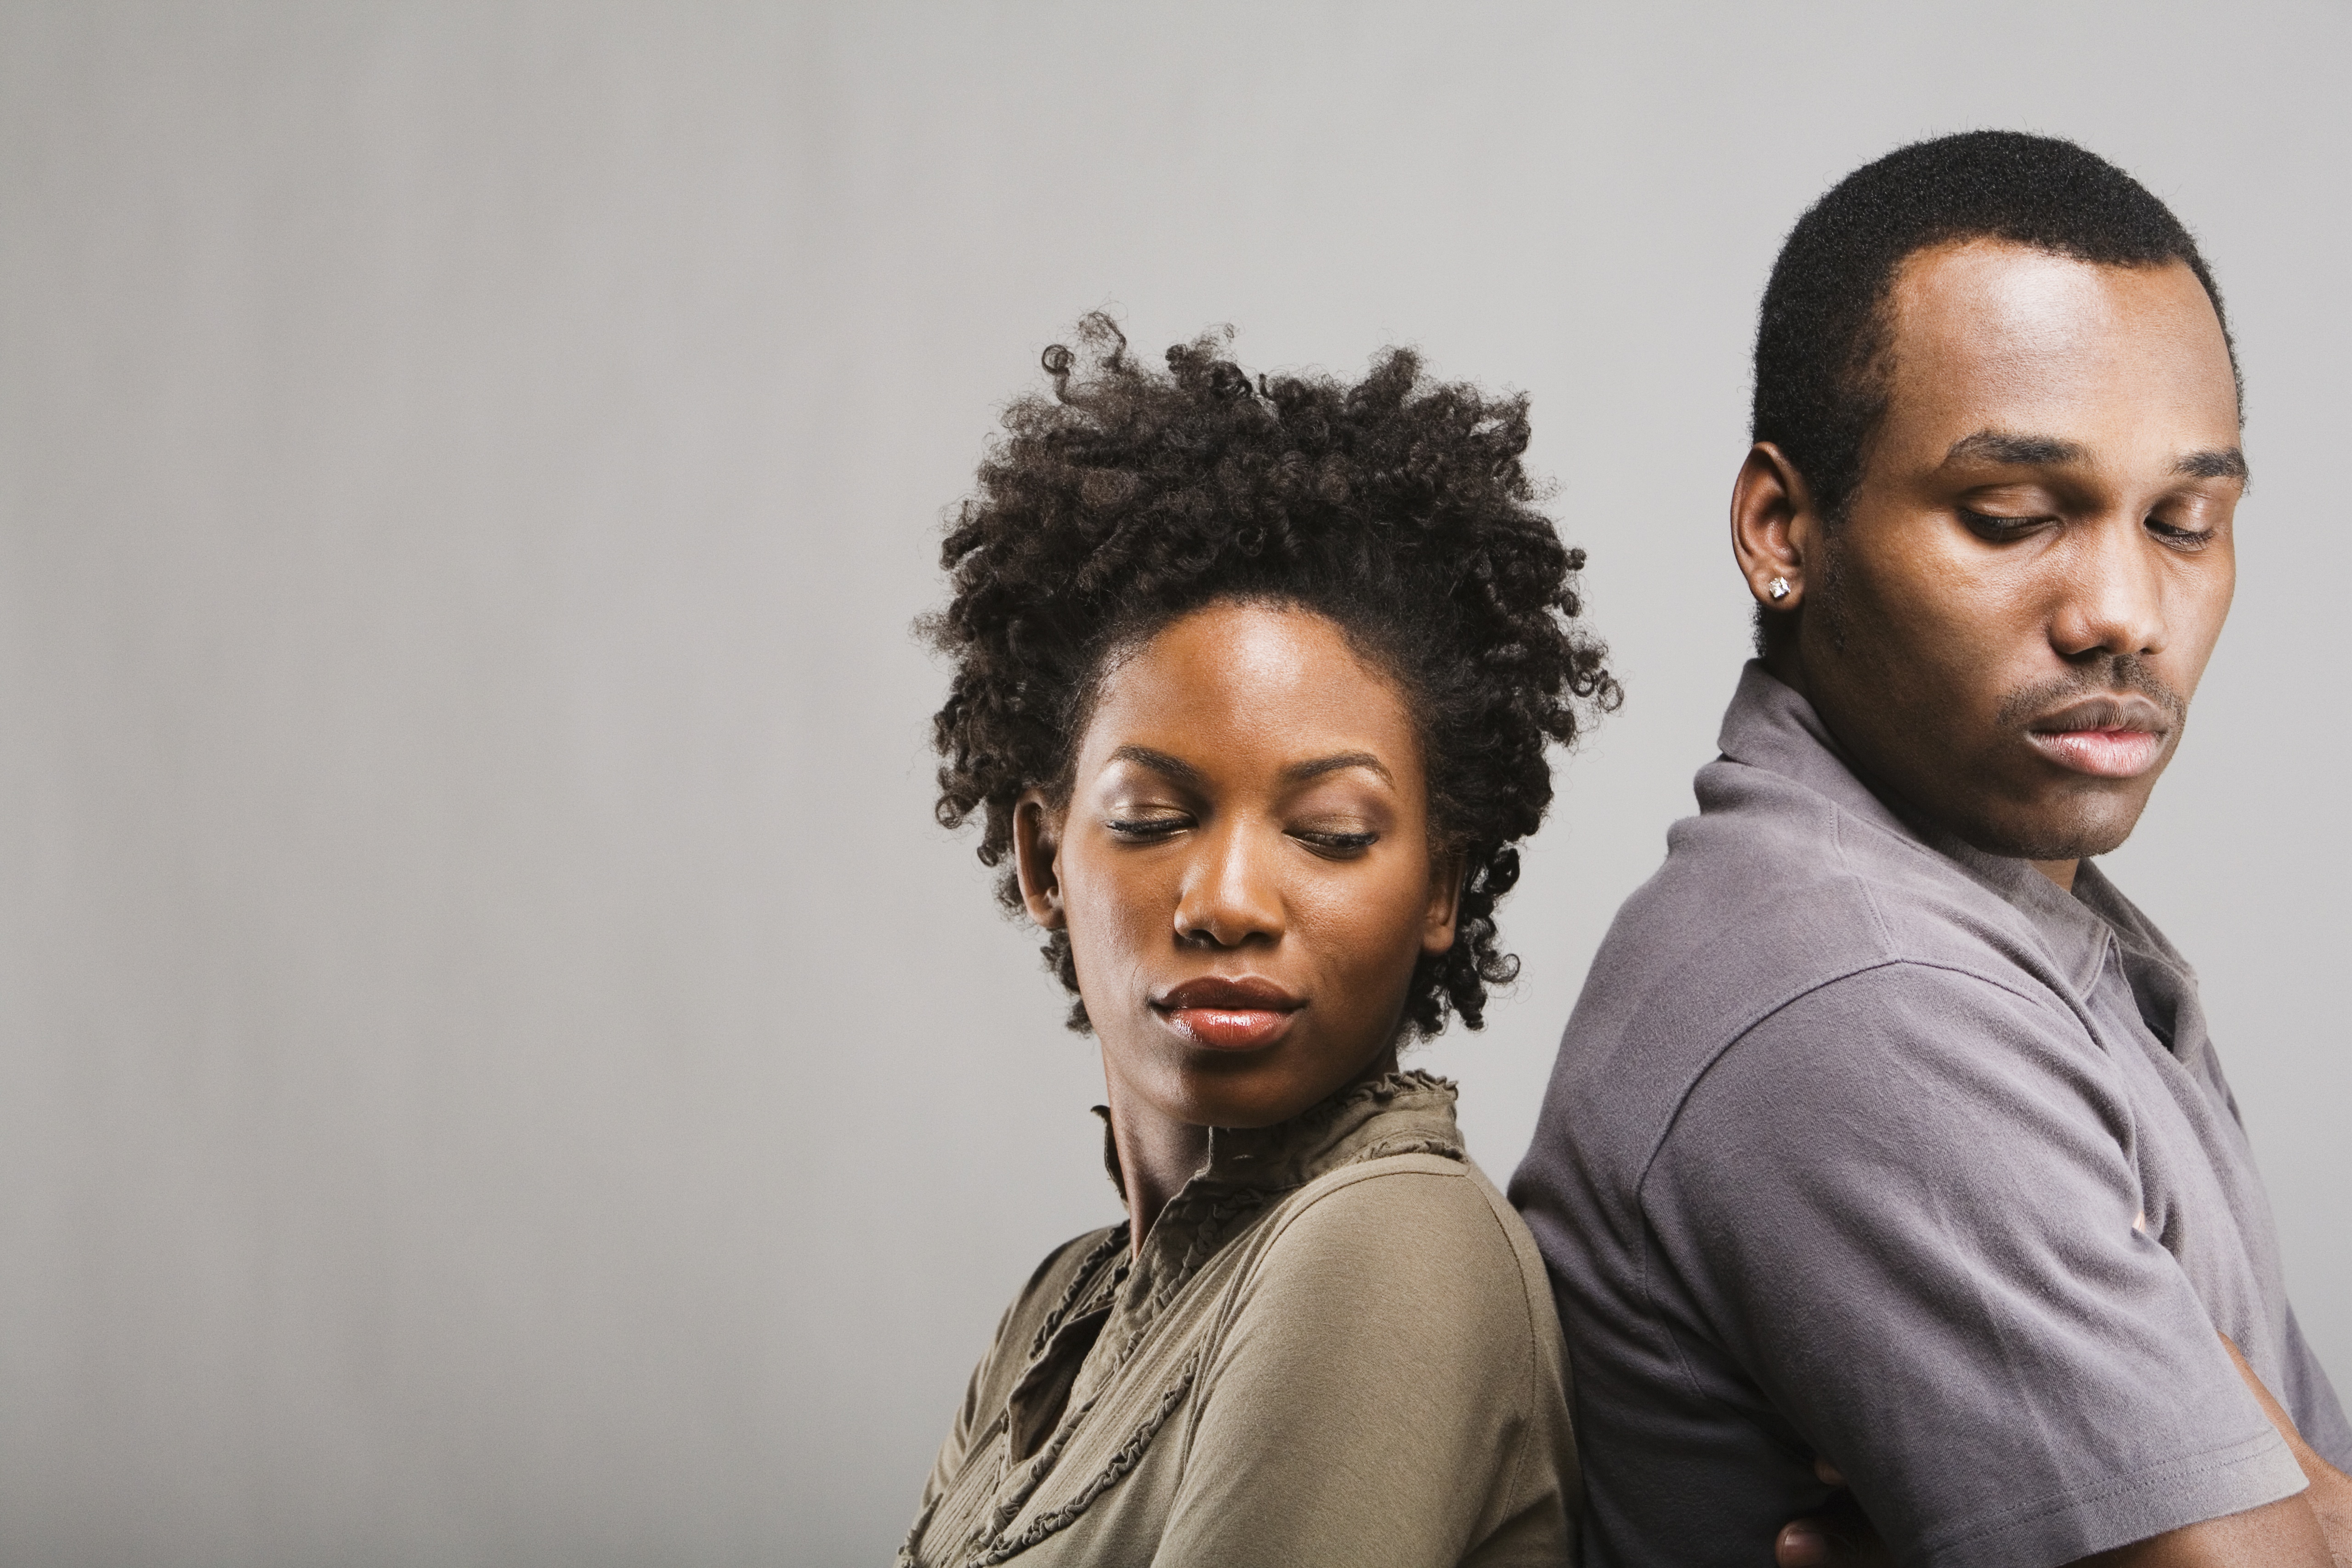 Angry African American couple standing back to back | Source: Getty Images